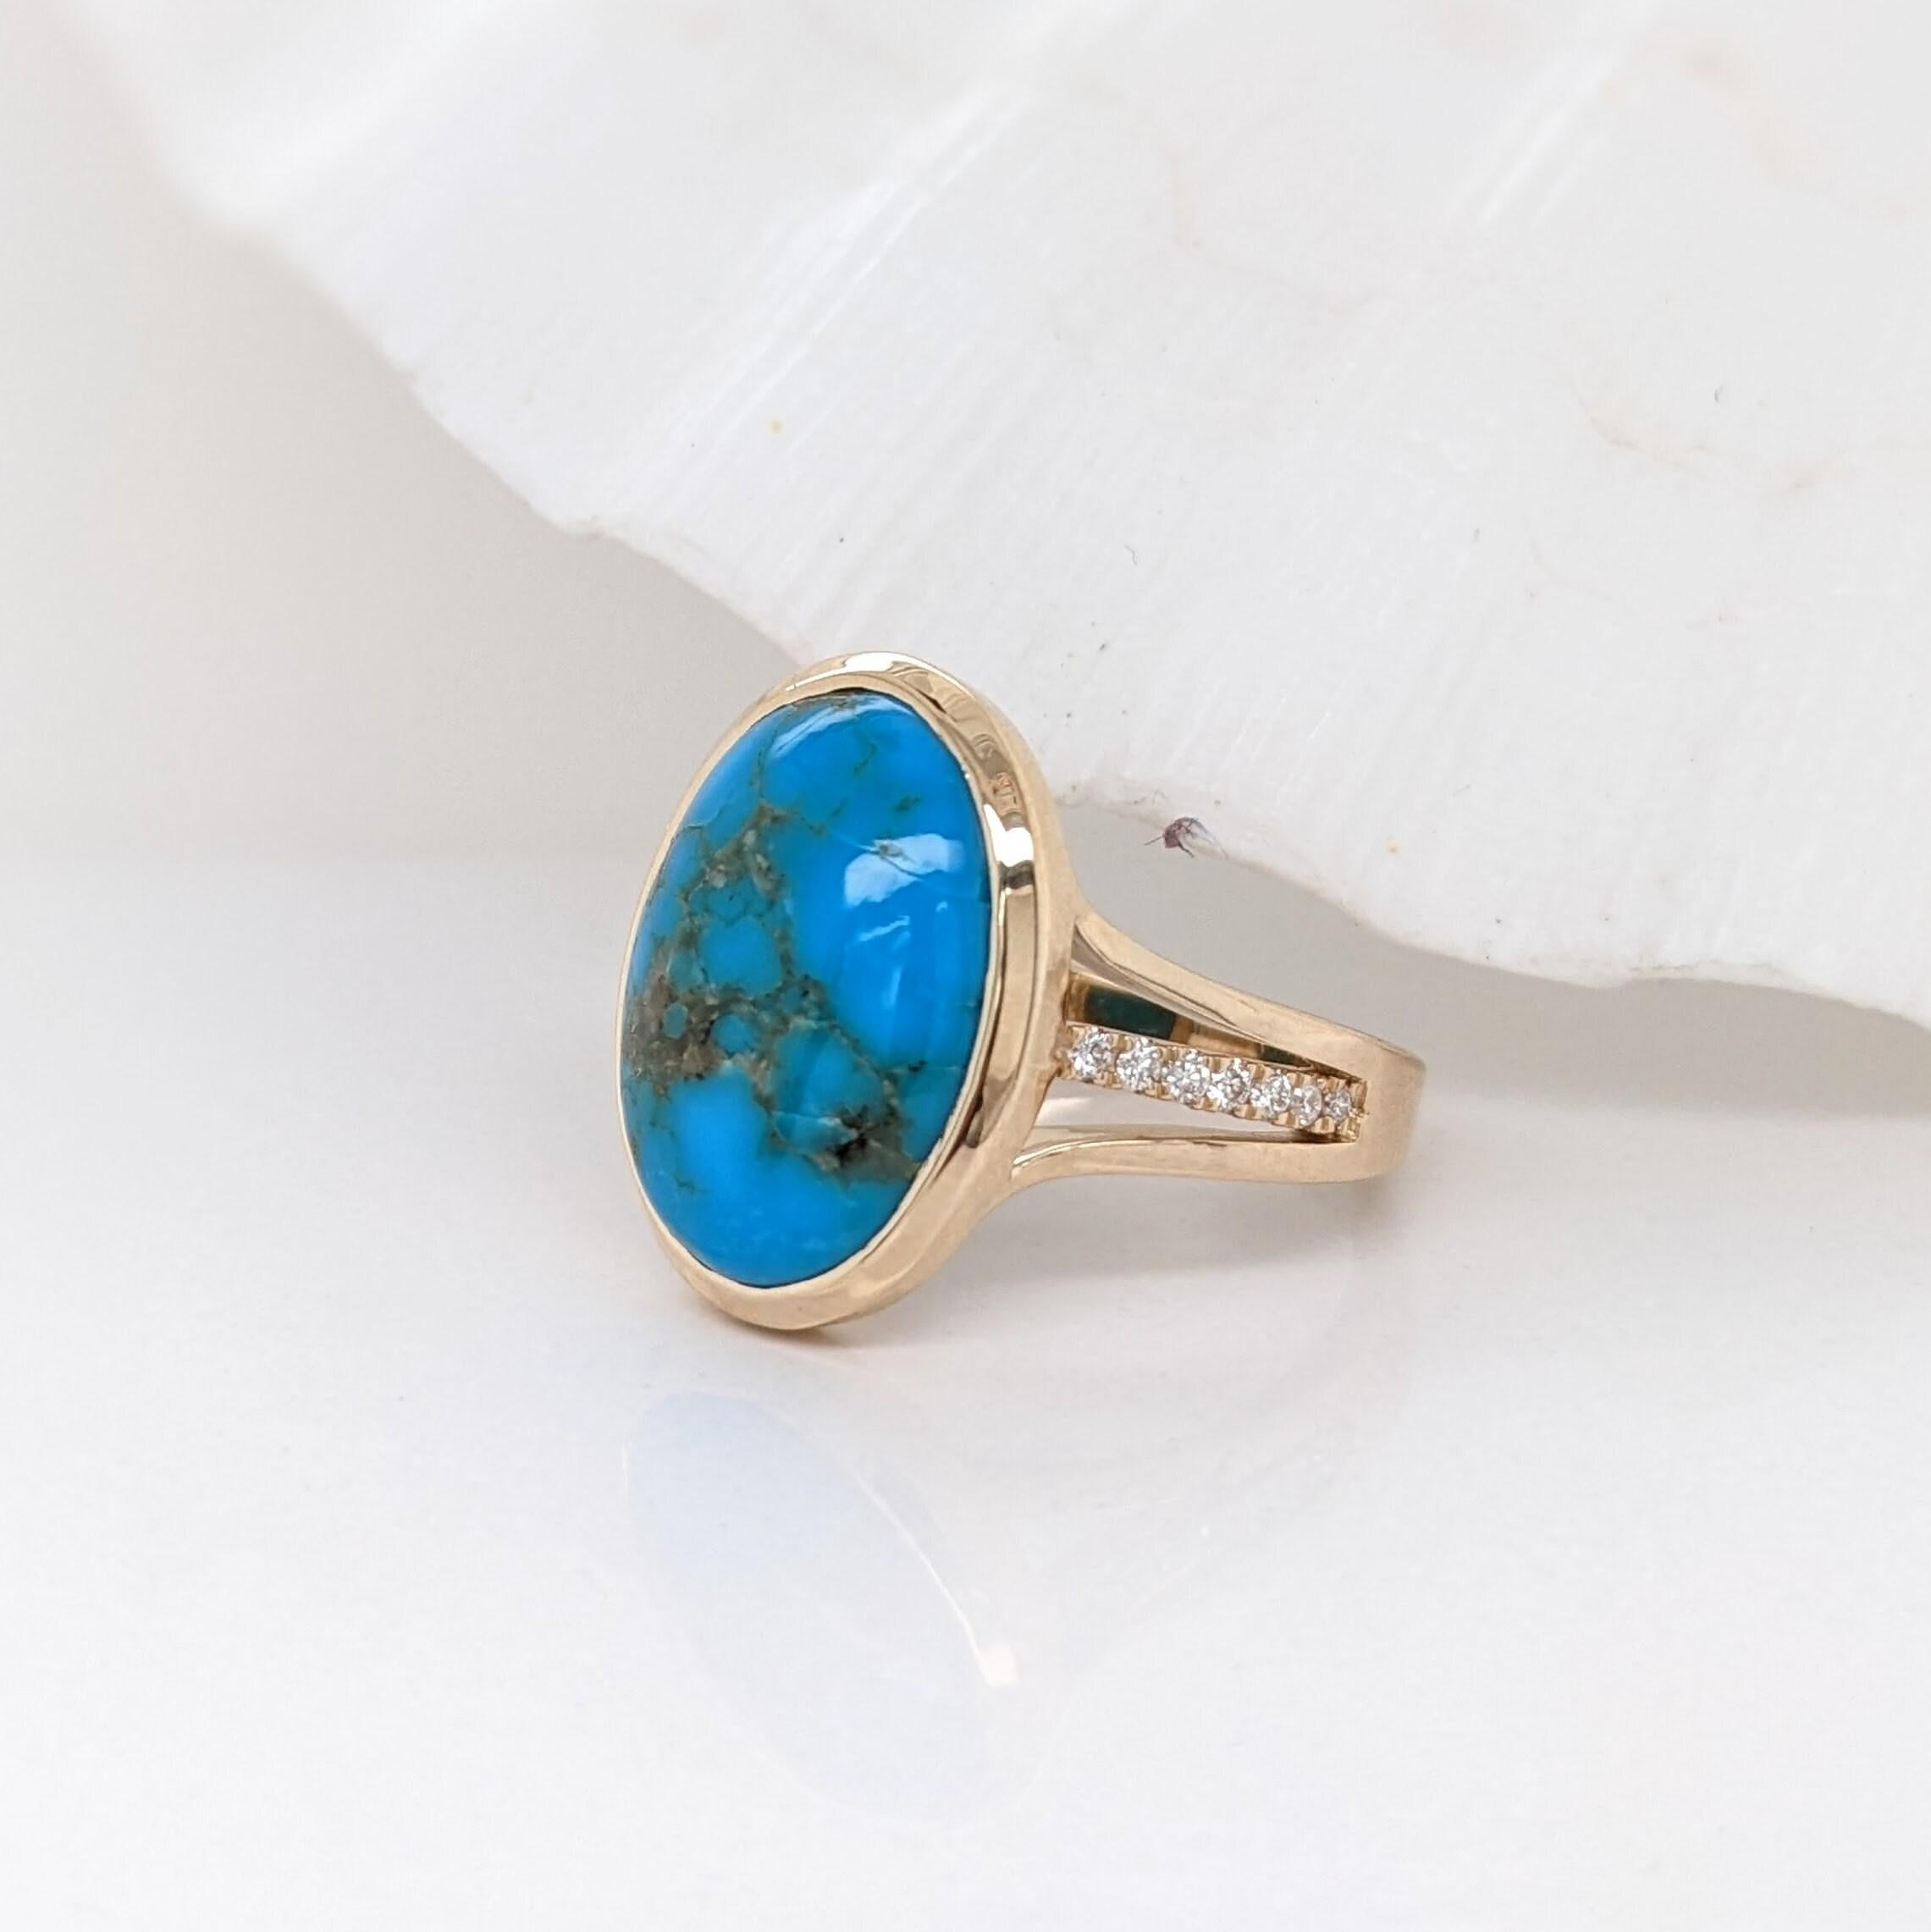 Art Deco 6.3ct Sonoran Turquoise Ring w Earth Mined Diamonds in Solid 14K Gold Oval 16x12